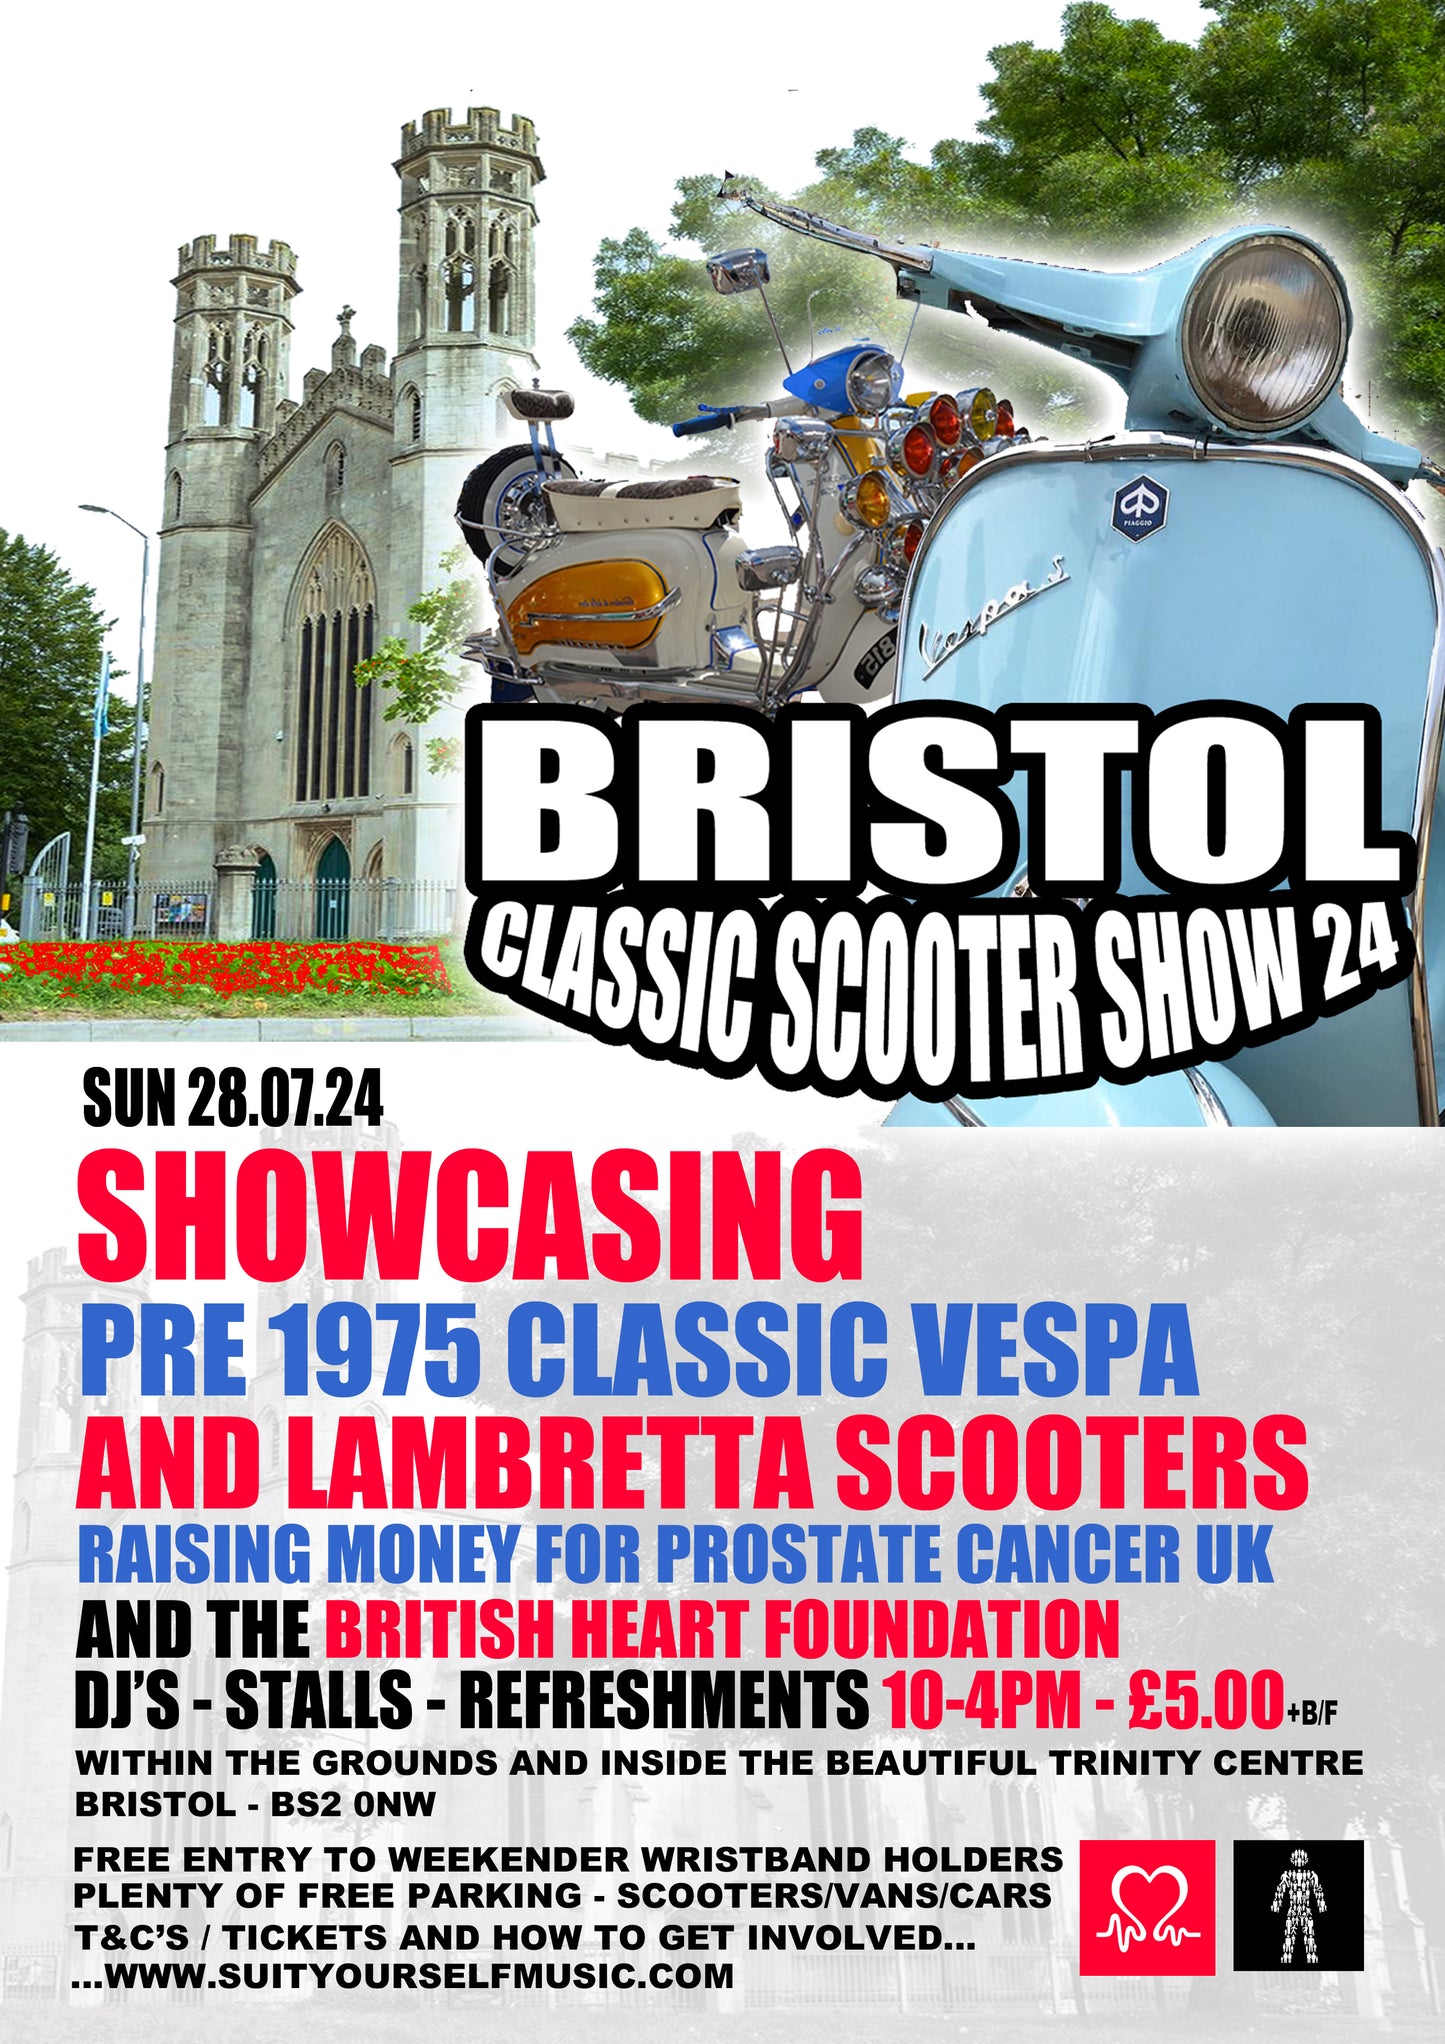 Classic scooter show Ticket at The Trinity Centre - Bristol 28.07.24 - Suit Yourself Music